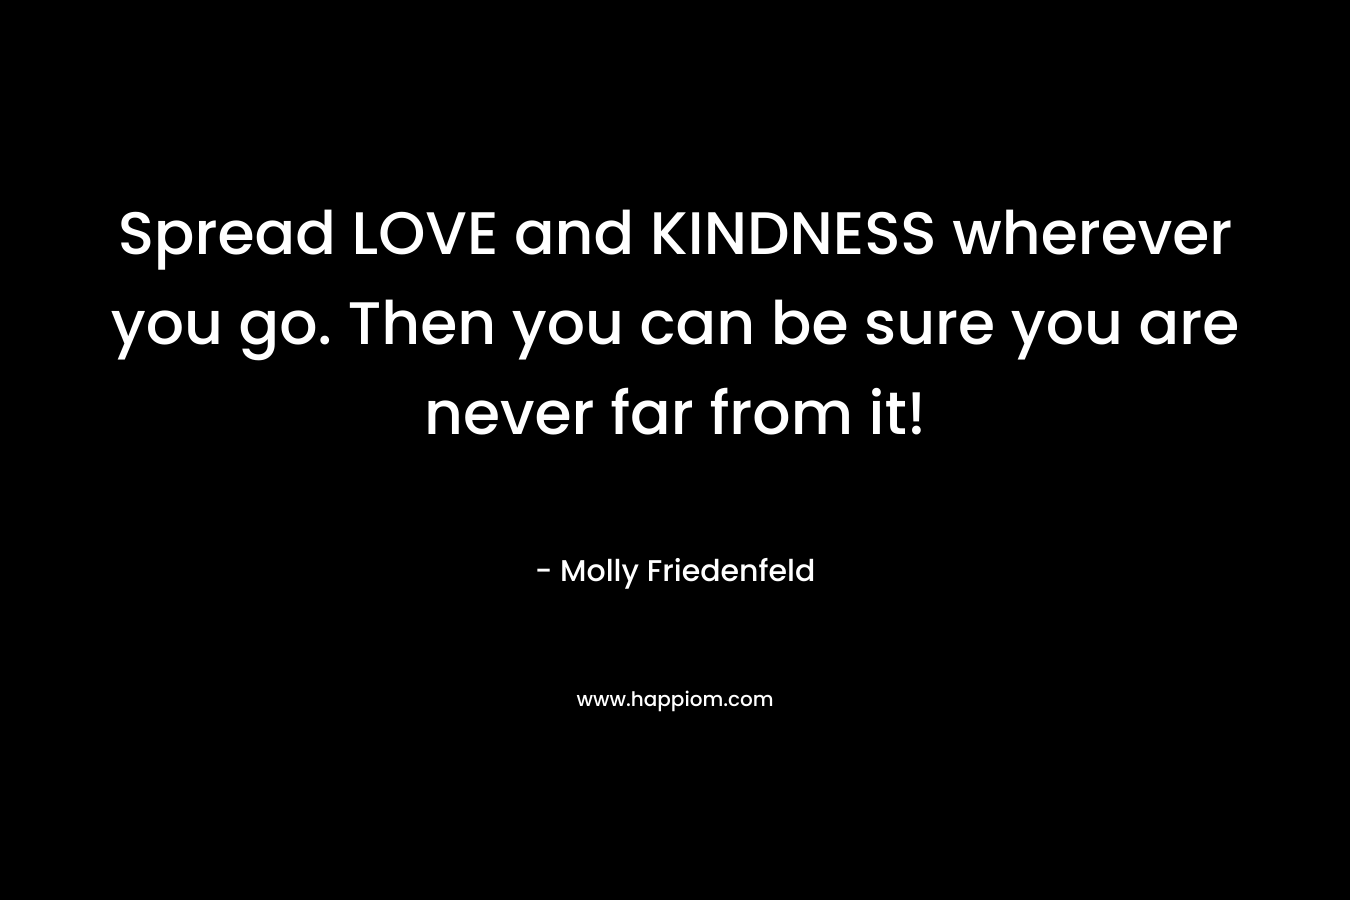 Spread LOVE and KINDNESS wherever you go. Then you can be sure you are never far from it!